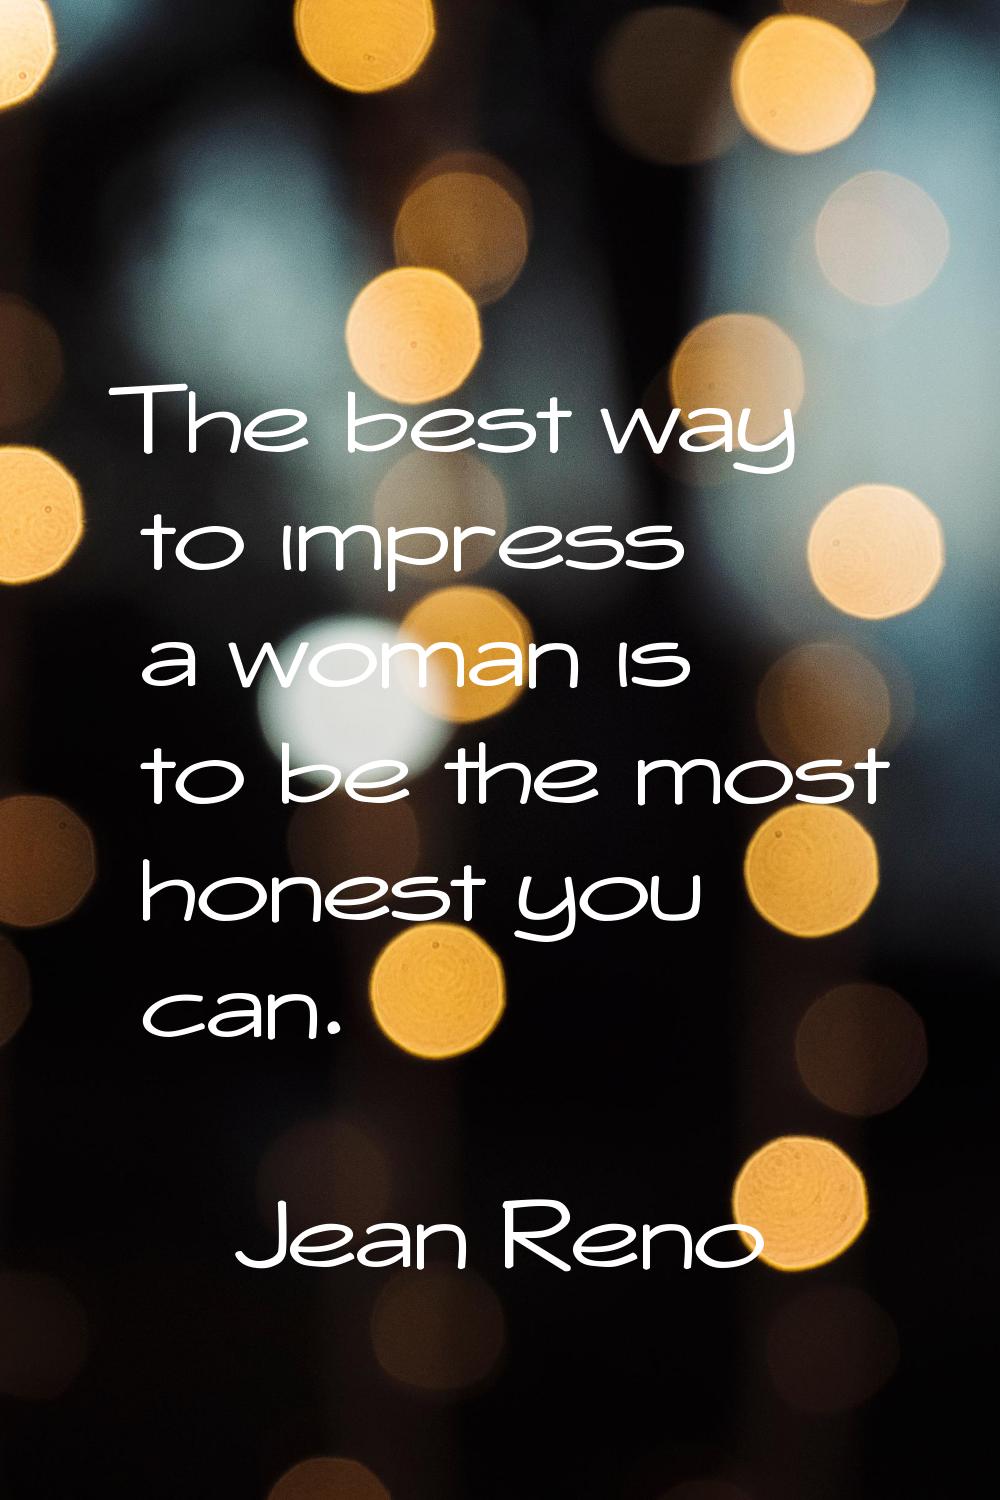 The best way to impress a woman is to be the most honest you can.